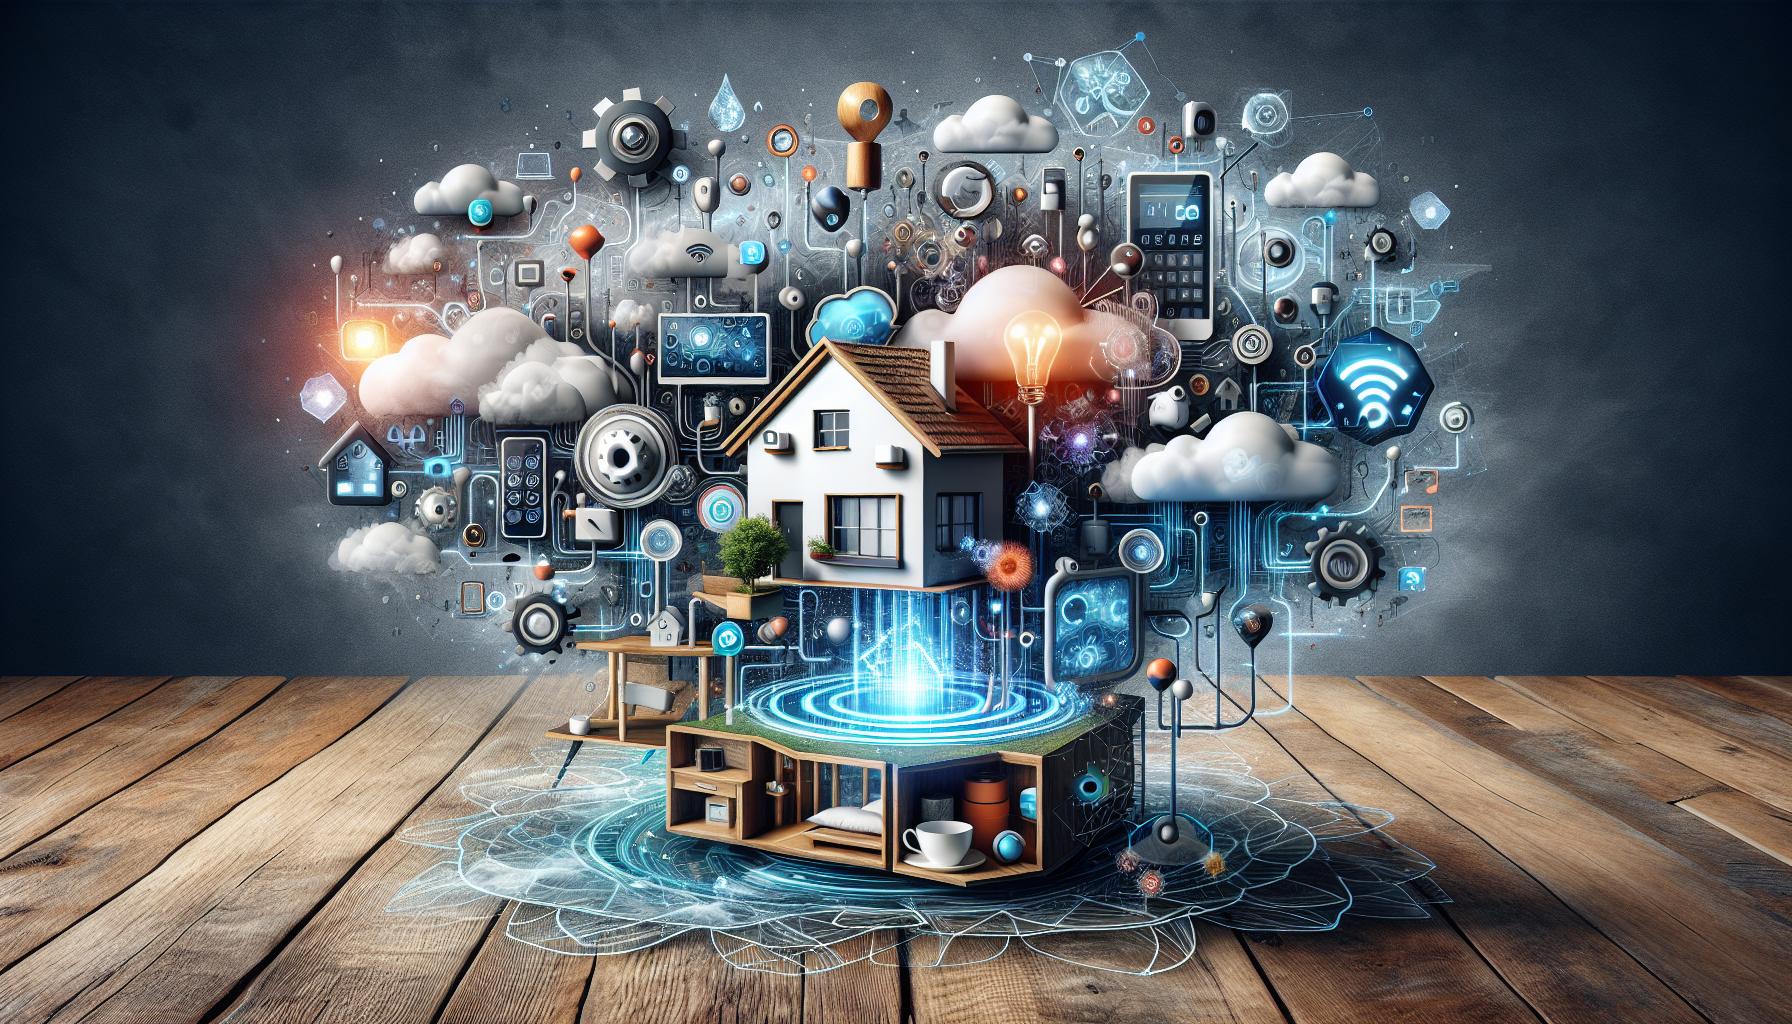 Integrating IoT: Making Your Home Smarter and Safer